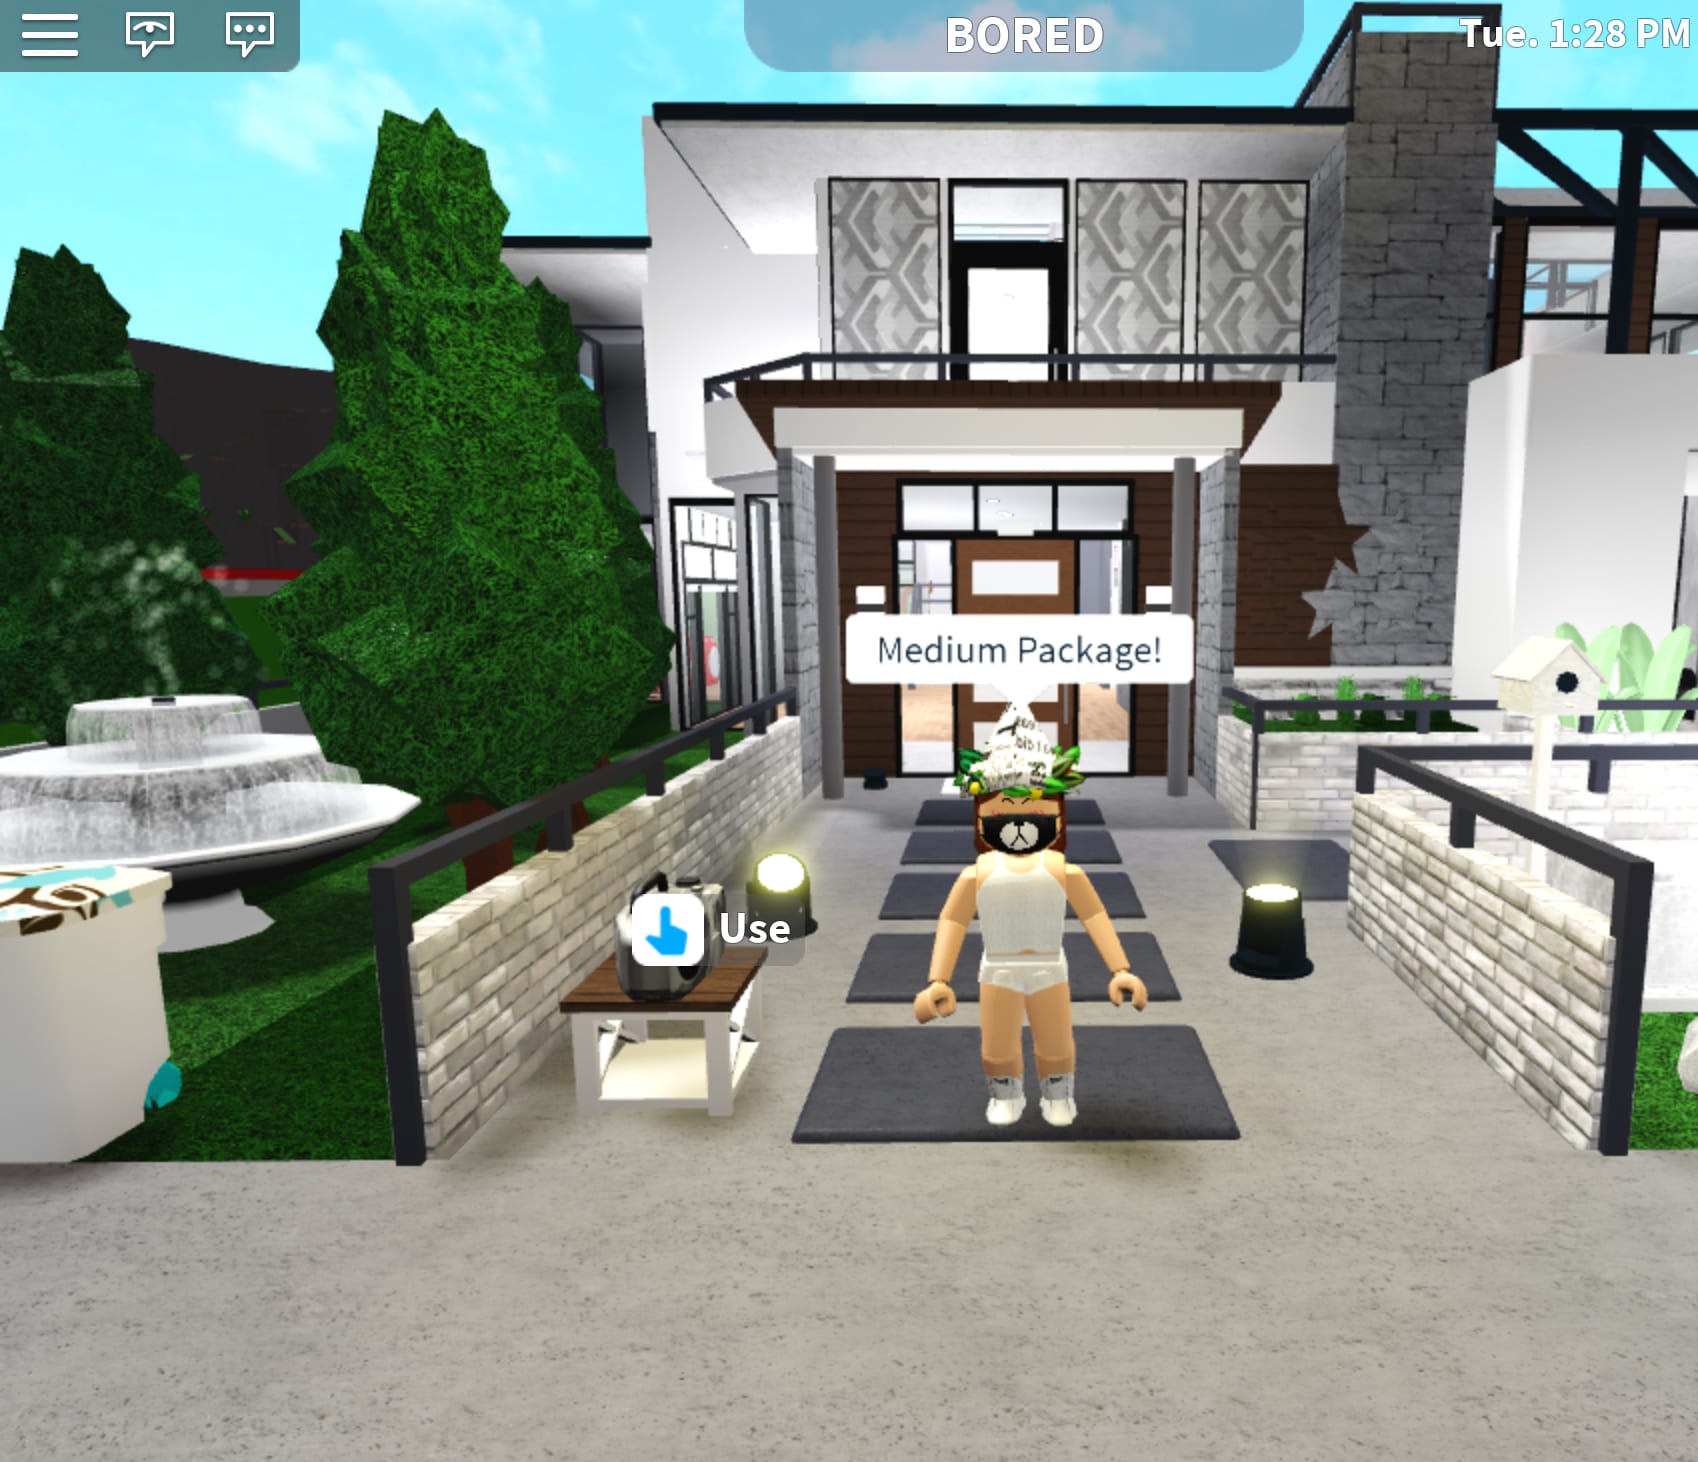 Build Your Dream House In Bloxburg By Mzdog10 - dream house bloxburg roblox houses